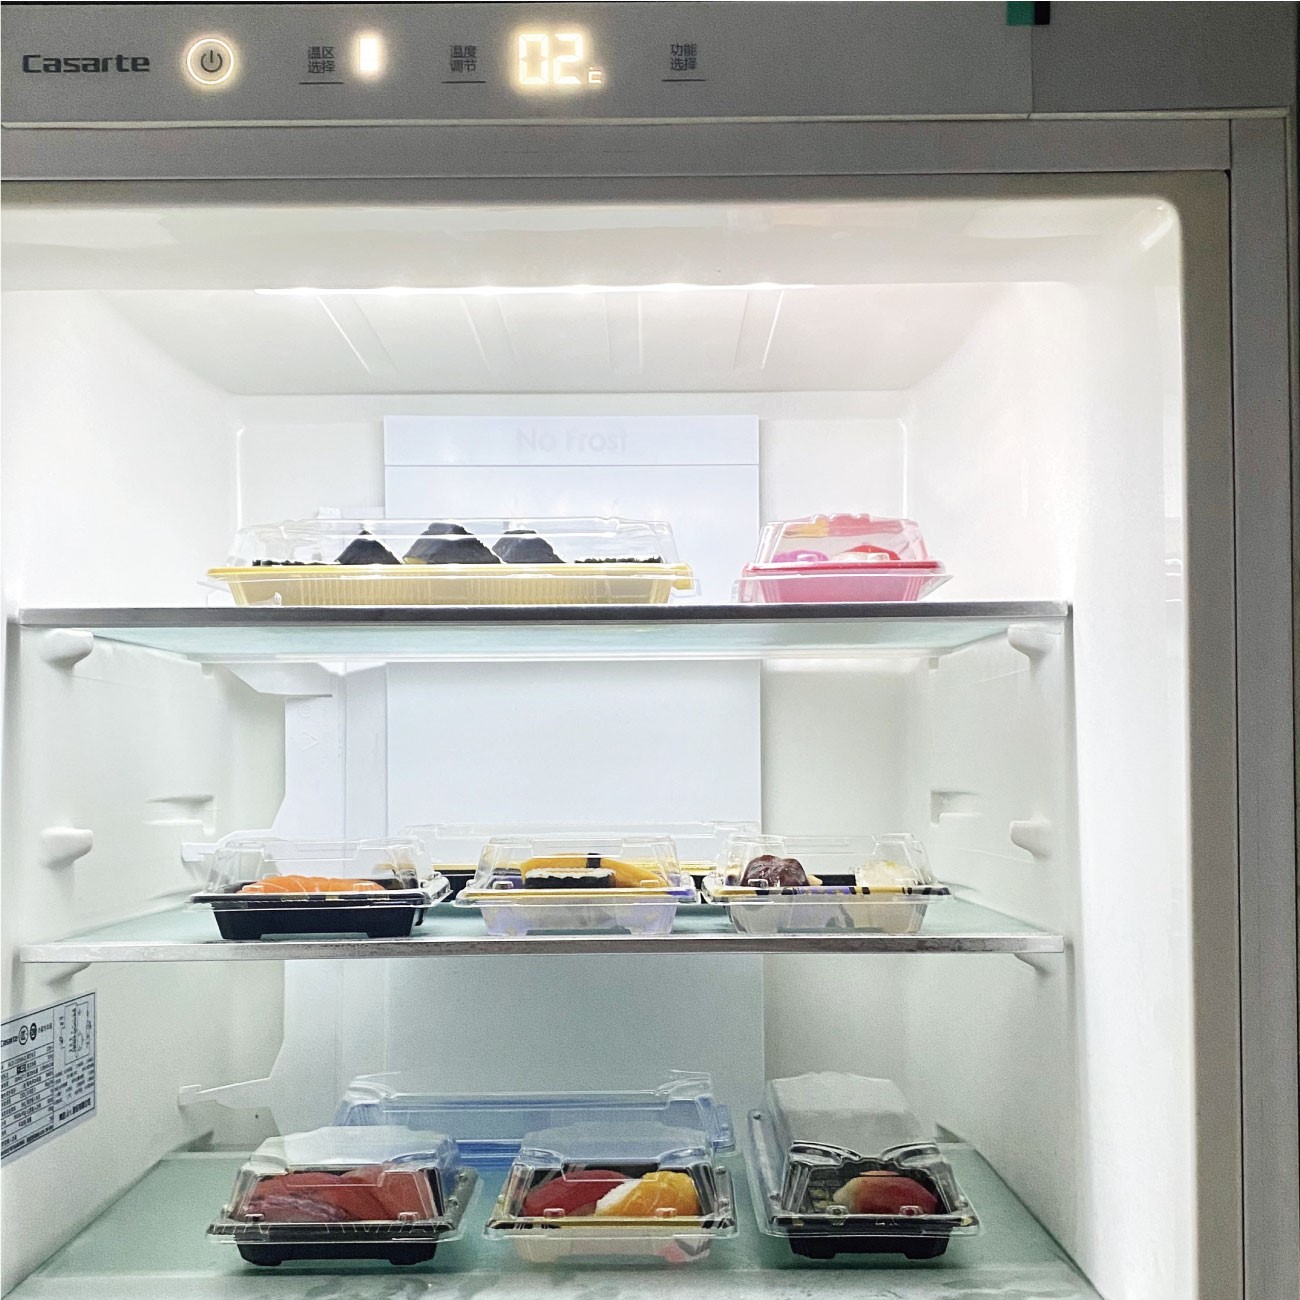 There are some sushi plates WL-05 in the refrigerator, which can be used for refrigeration.